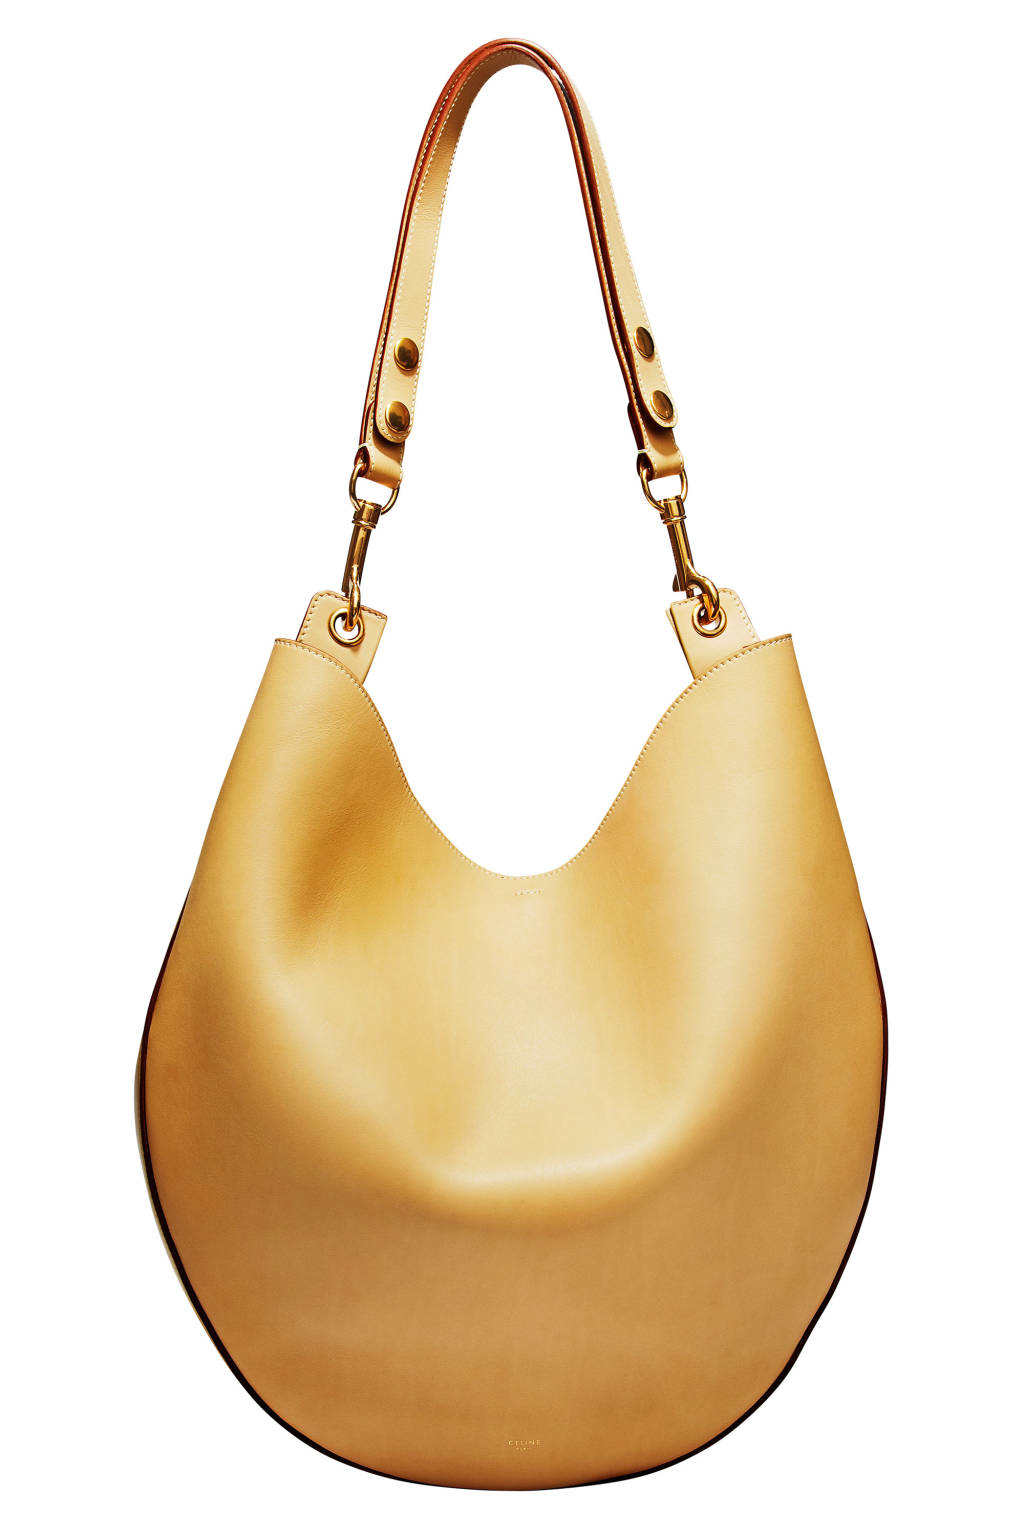 celine bag online authentic - The 6 Bags Every Woman Should Own |